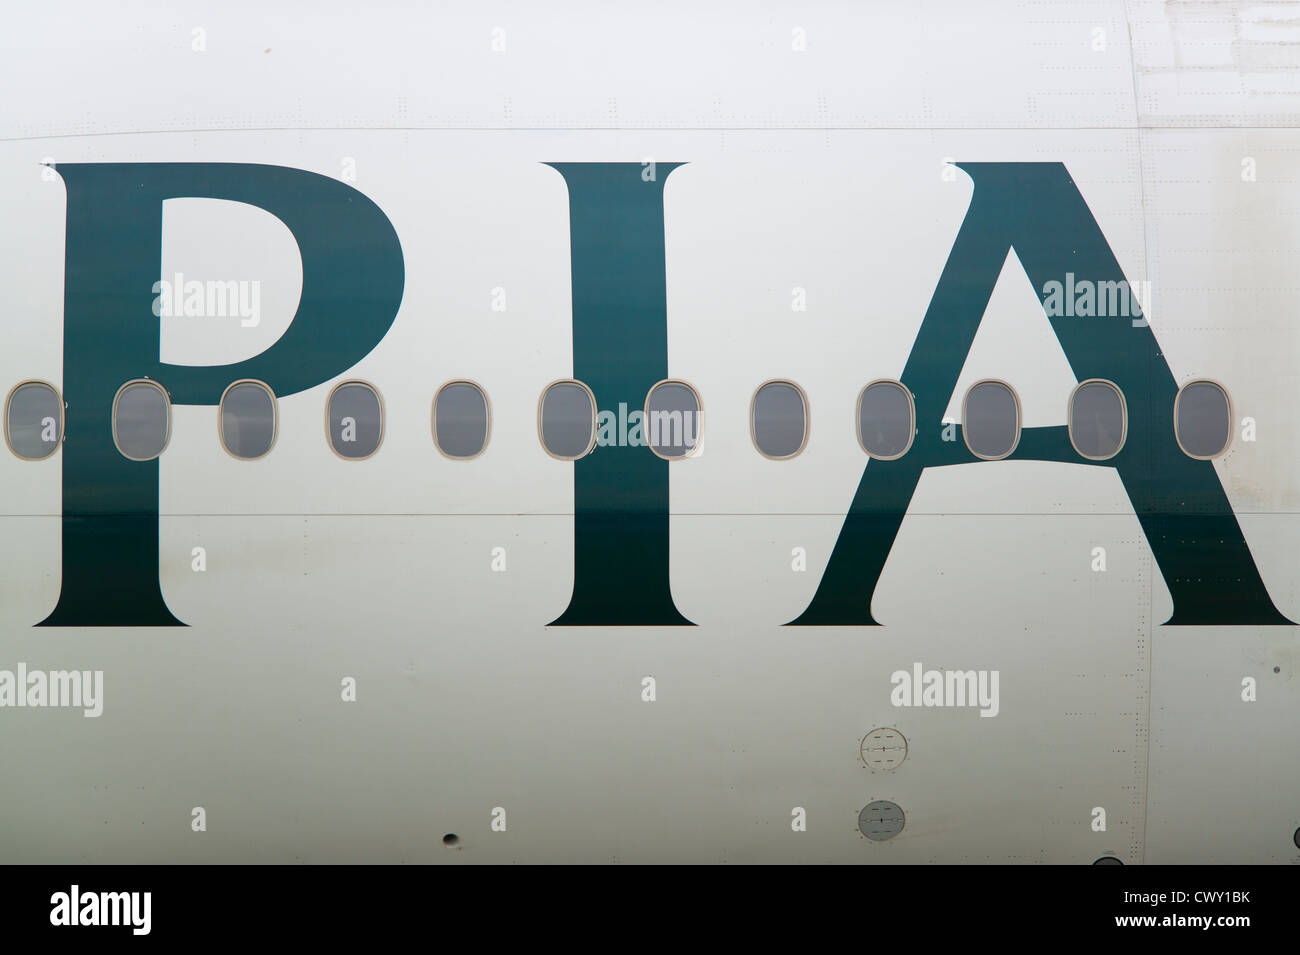 A close up of the Pakistan International Airlines PIA logo on the fuselage of a passenger aircraft (Editorial use only) Stock Photo